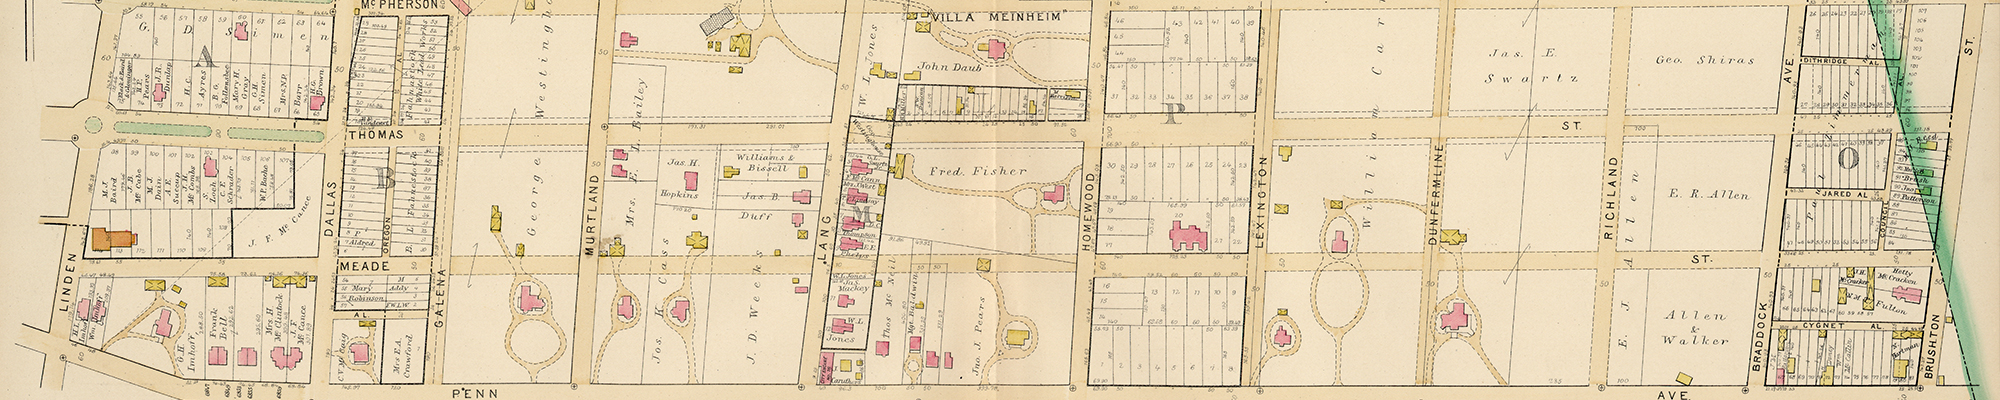 1890 section of map that includes Thomas Blvd.